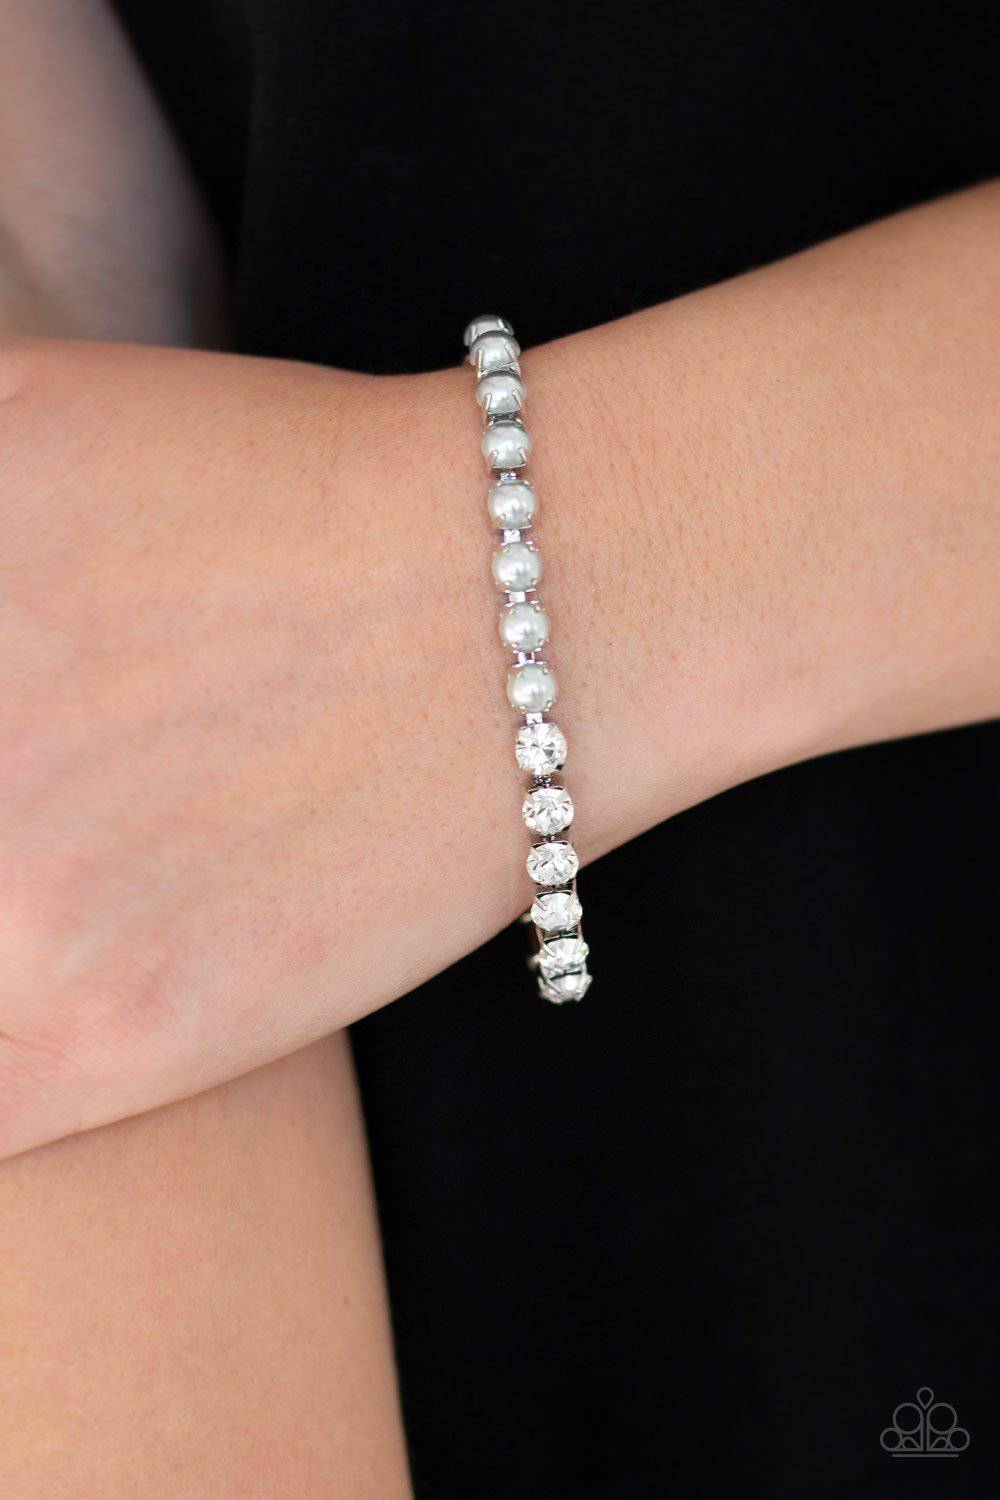 B246 - Out Like A SOCIALITE Silver Bracelet by Paparazzi Accessories on Fancy5Fashion.com